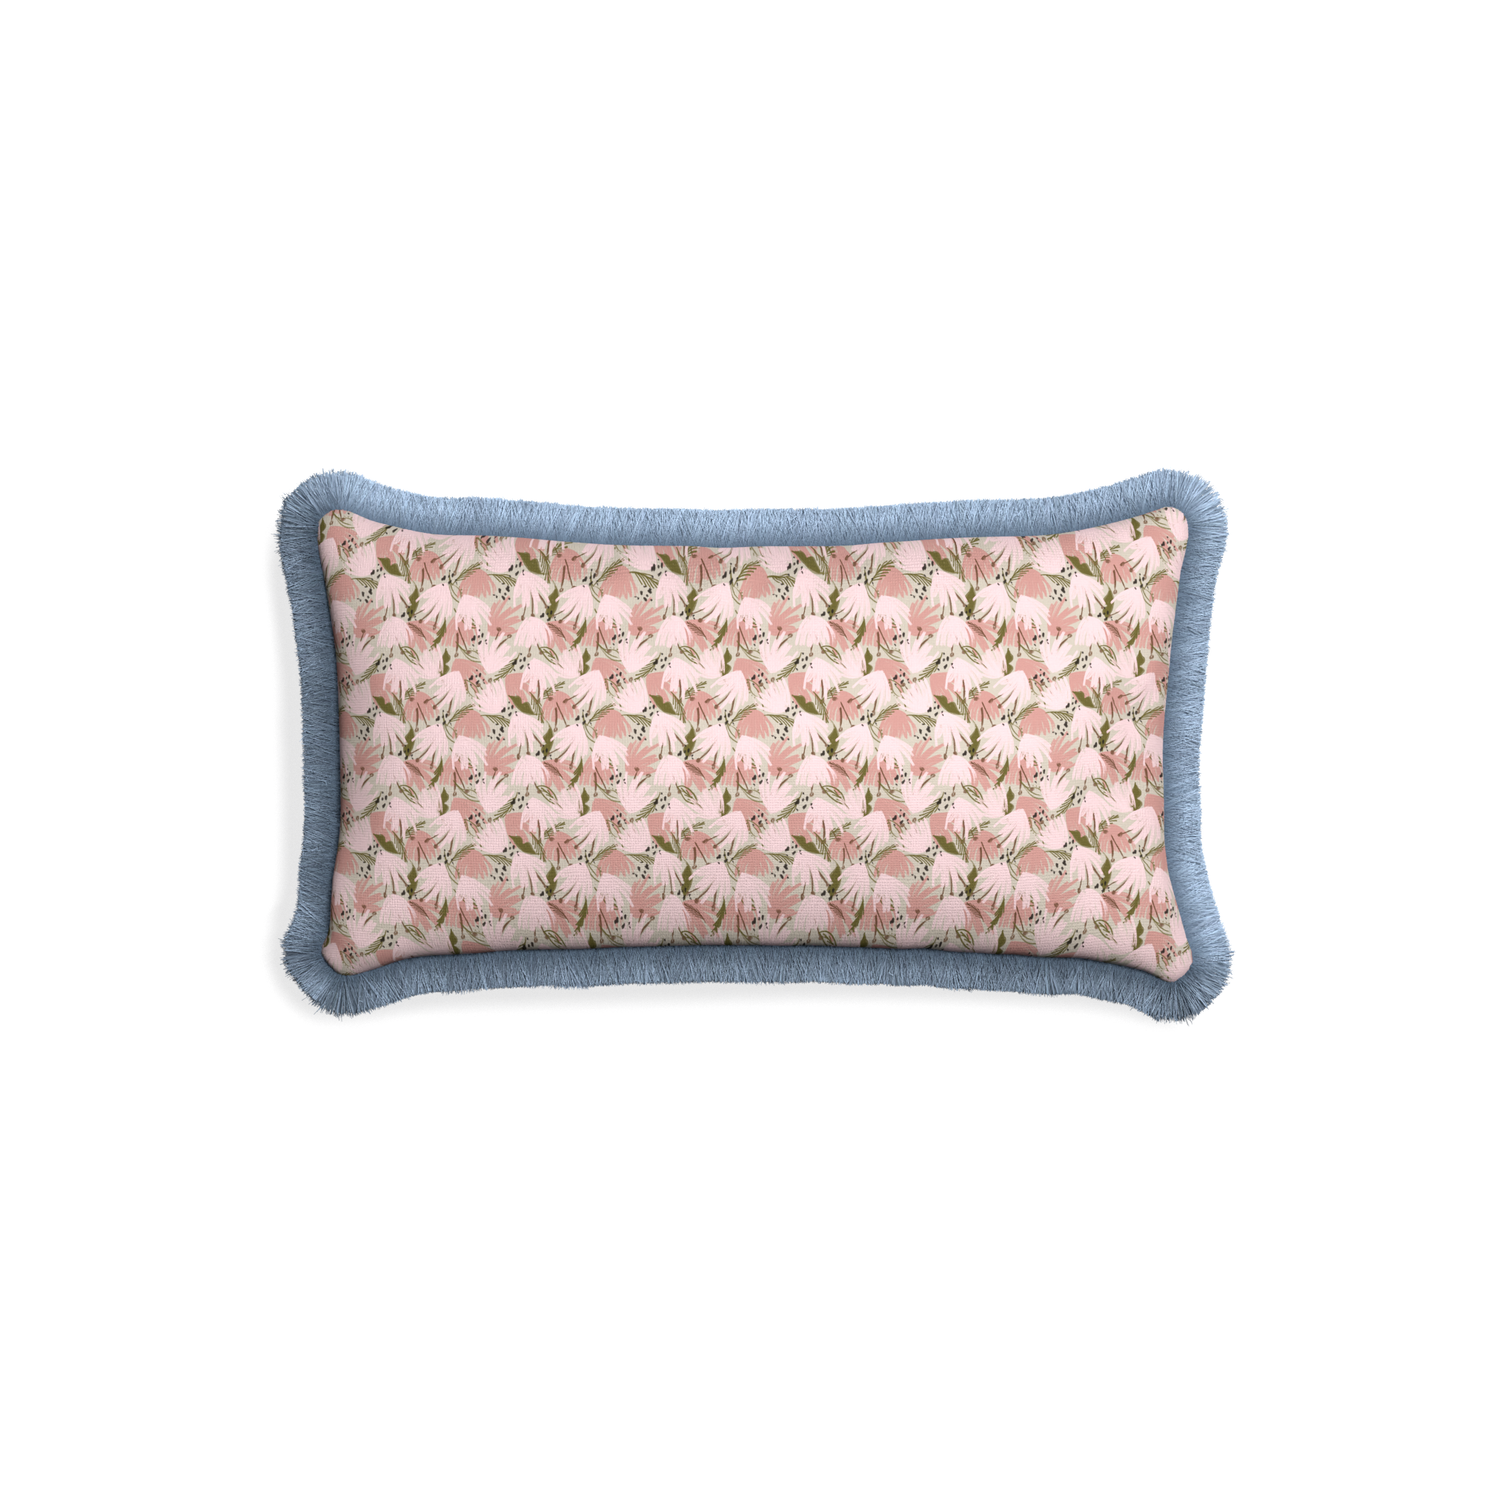 Petite-lumbar eden pink custom pink floralpillow with sky fringe on white background